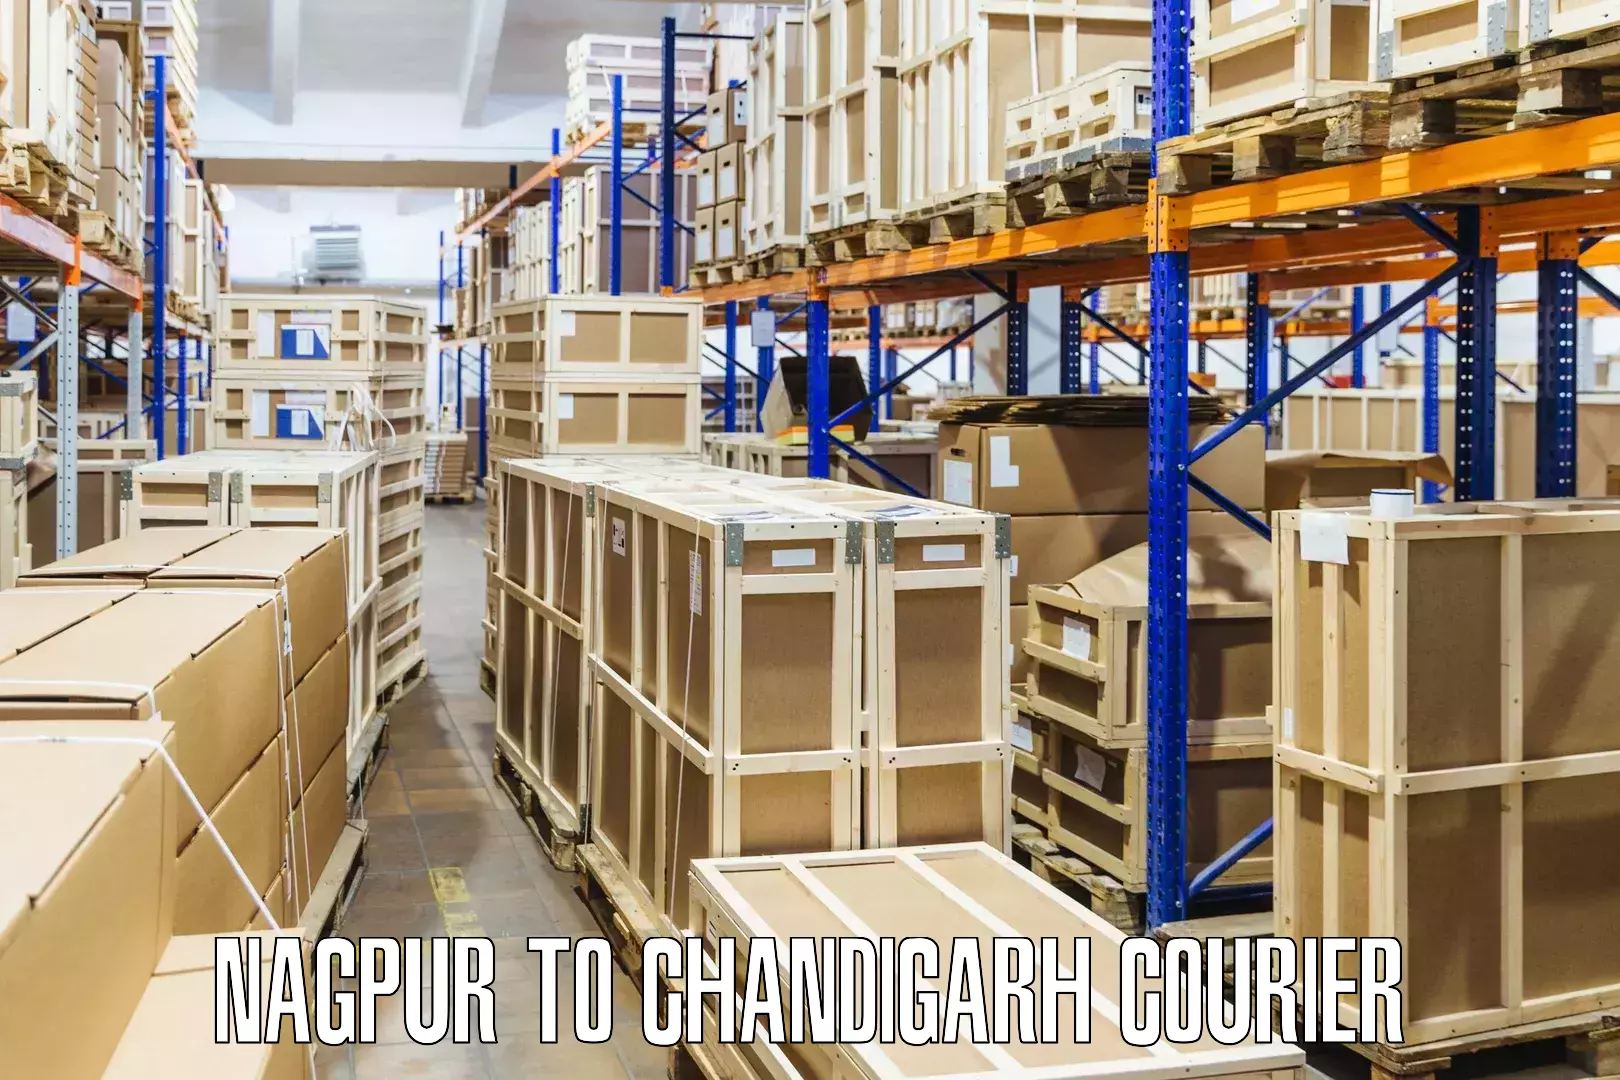 Tech-enabled shipping Nagpur to Chandigarh